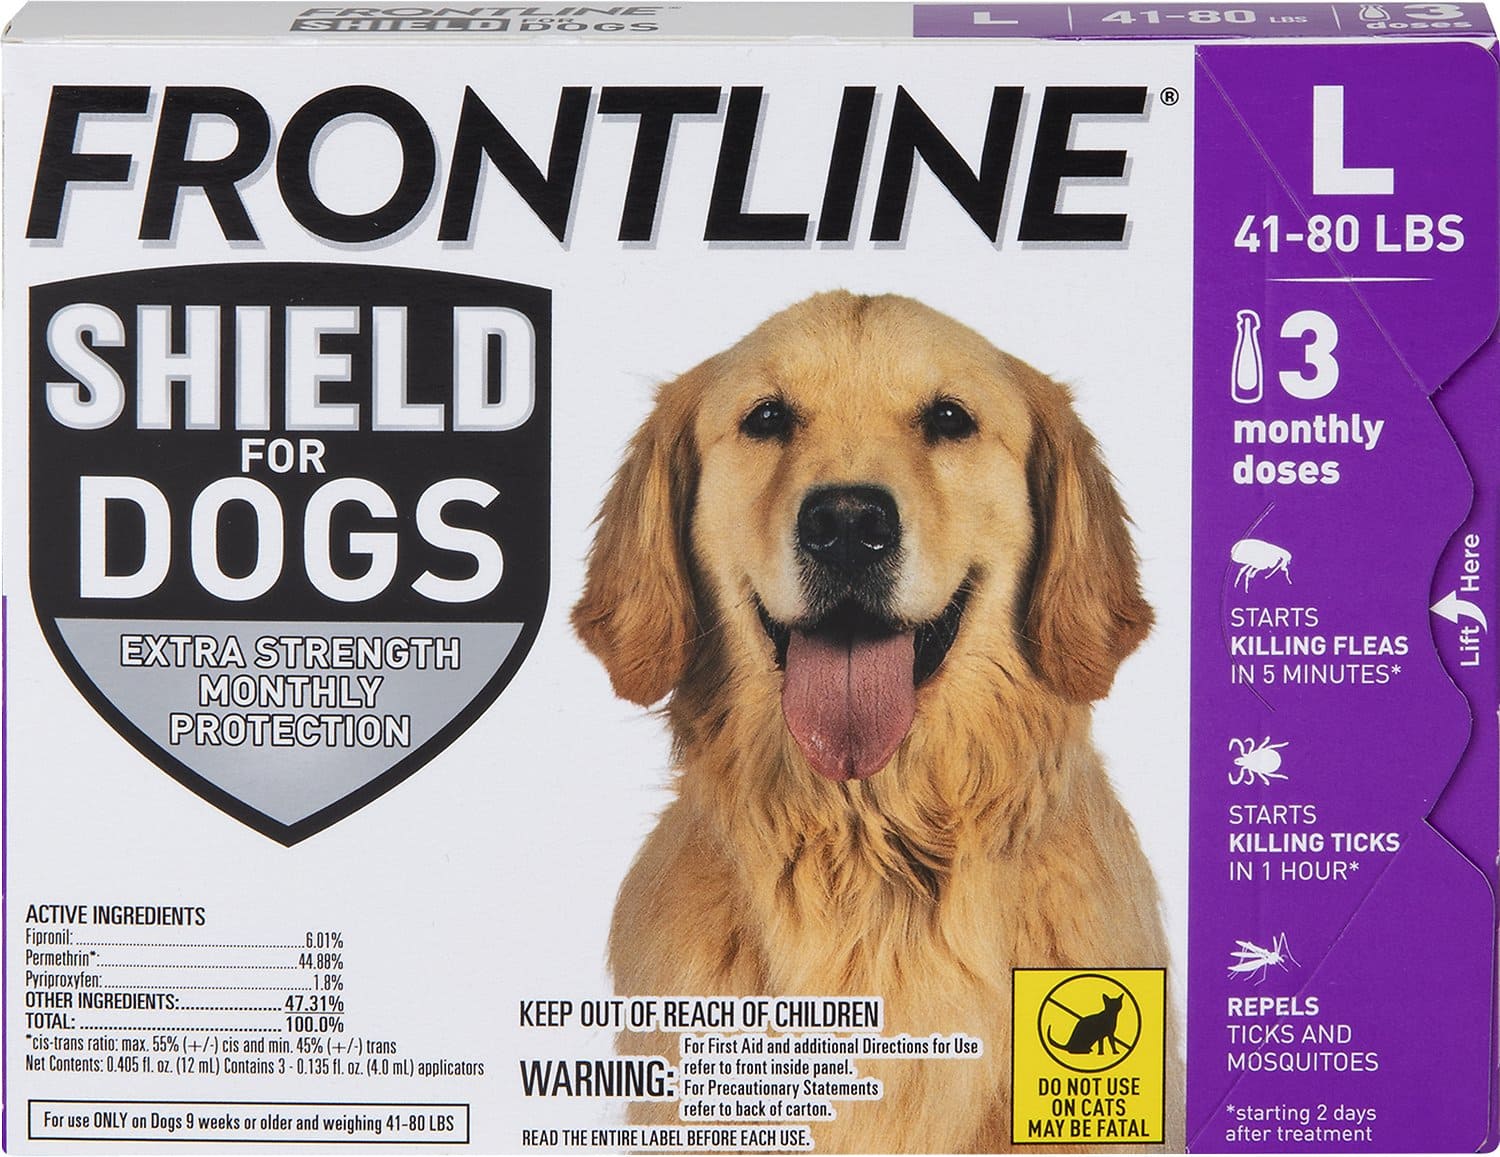 Frontline Shield 3 doses (3-month protection) for large dogs 41-80 lbs (Purple) 1